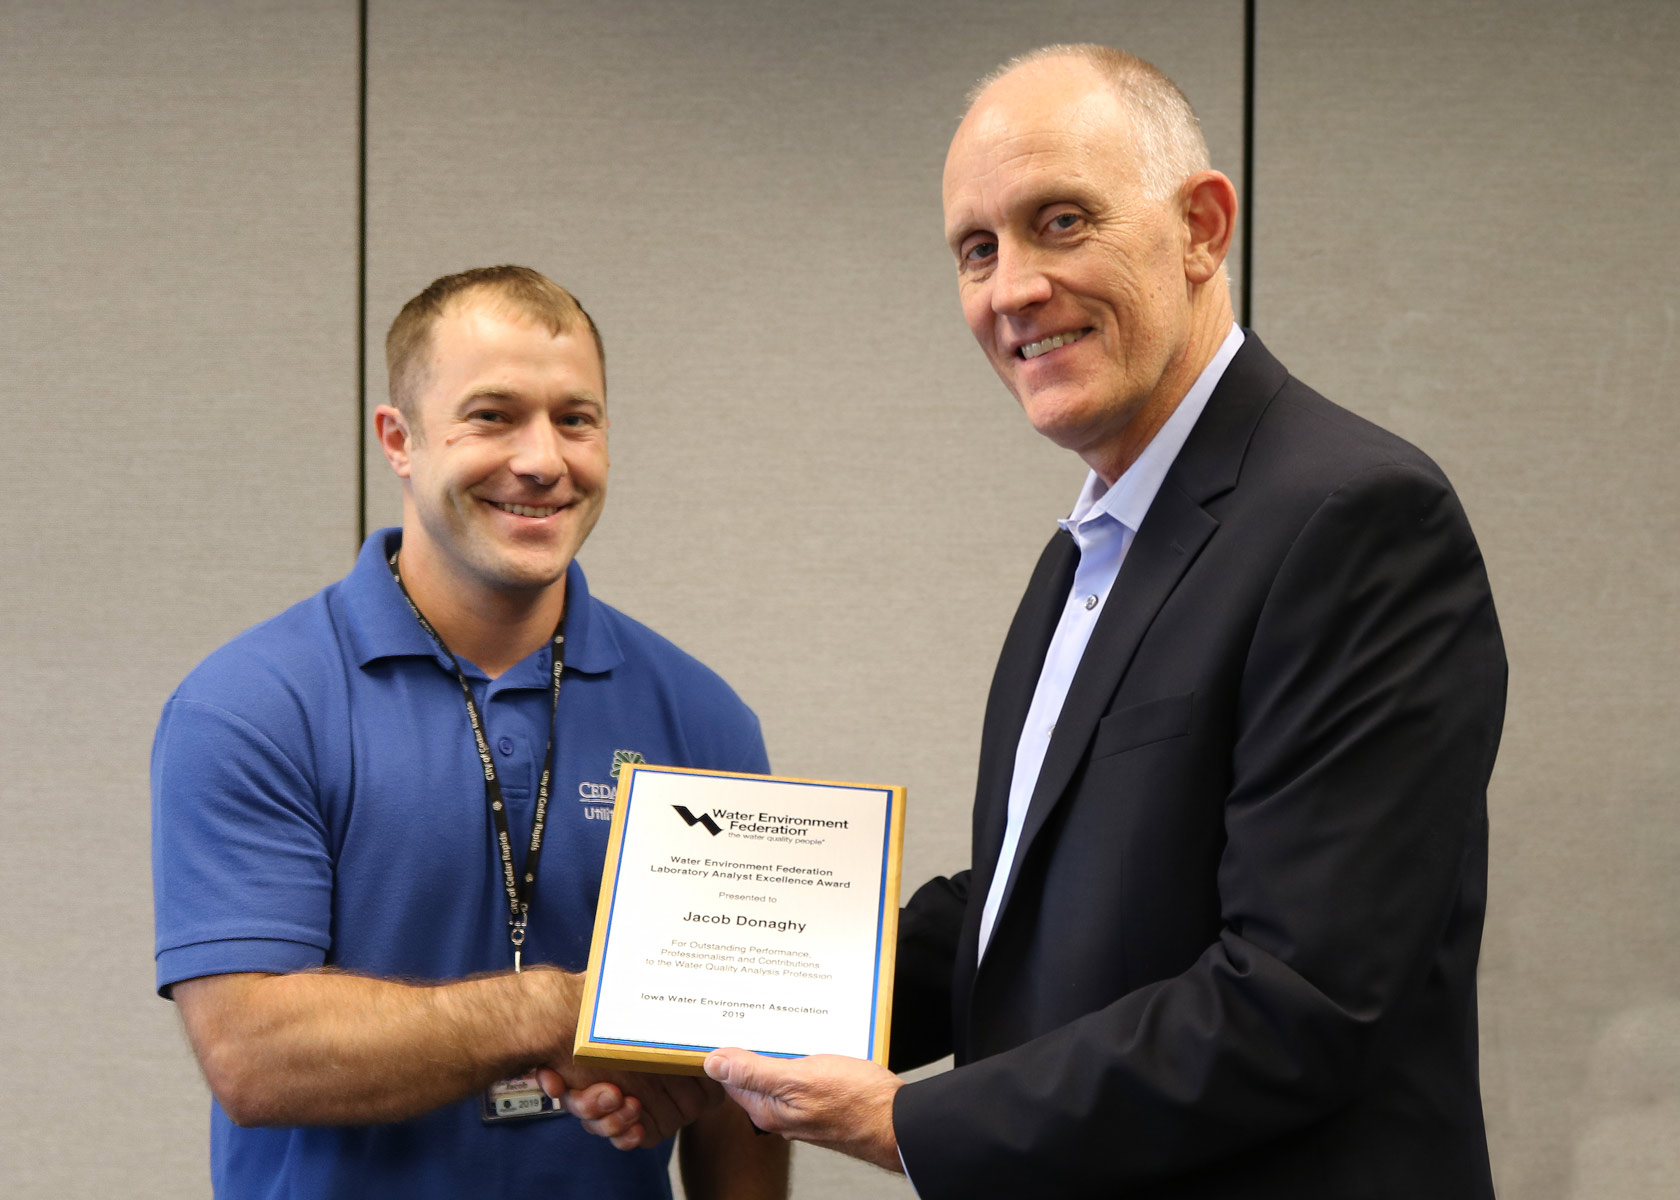 Utilities Director Steve Hershner presents the Laboratory Analyst Excellence Award to Jacob Donaghy.